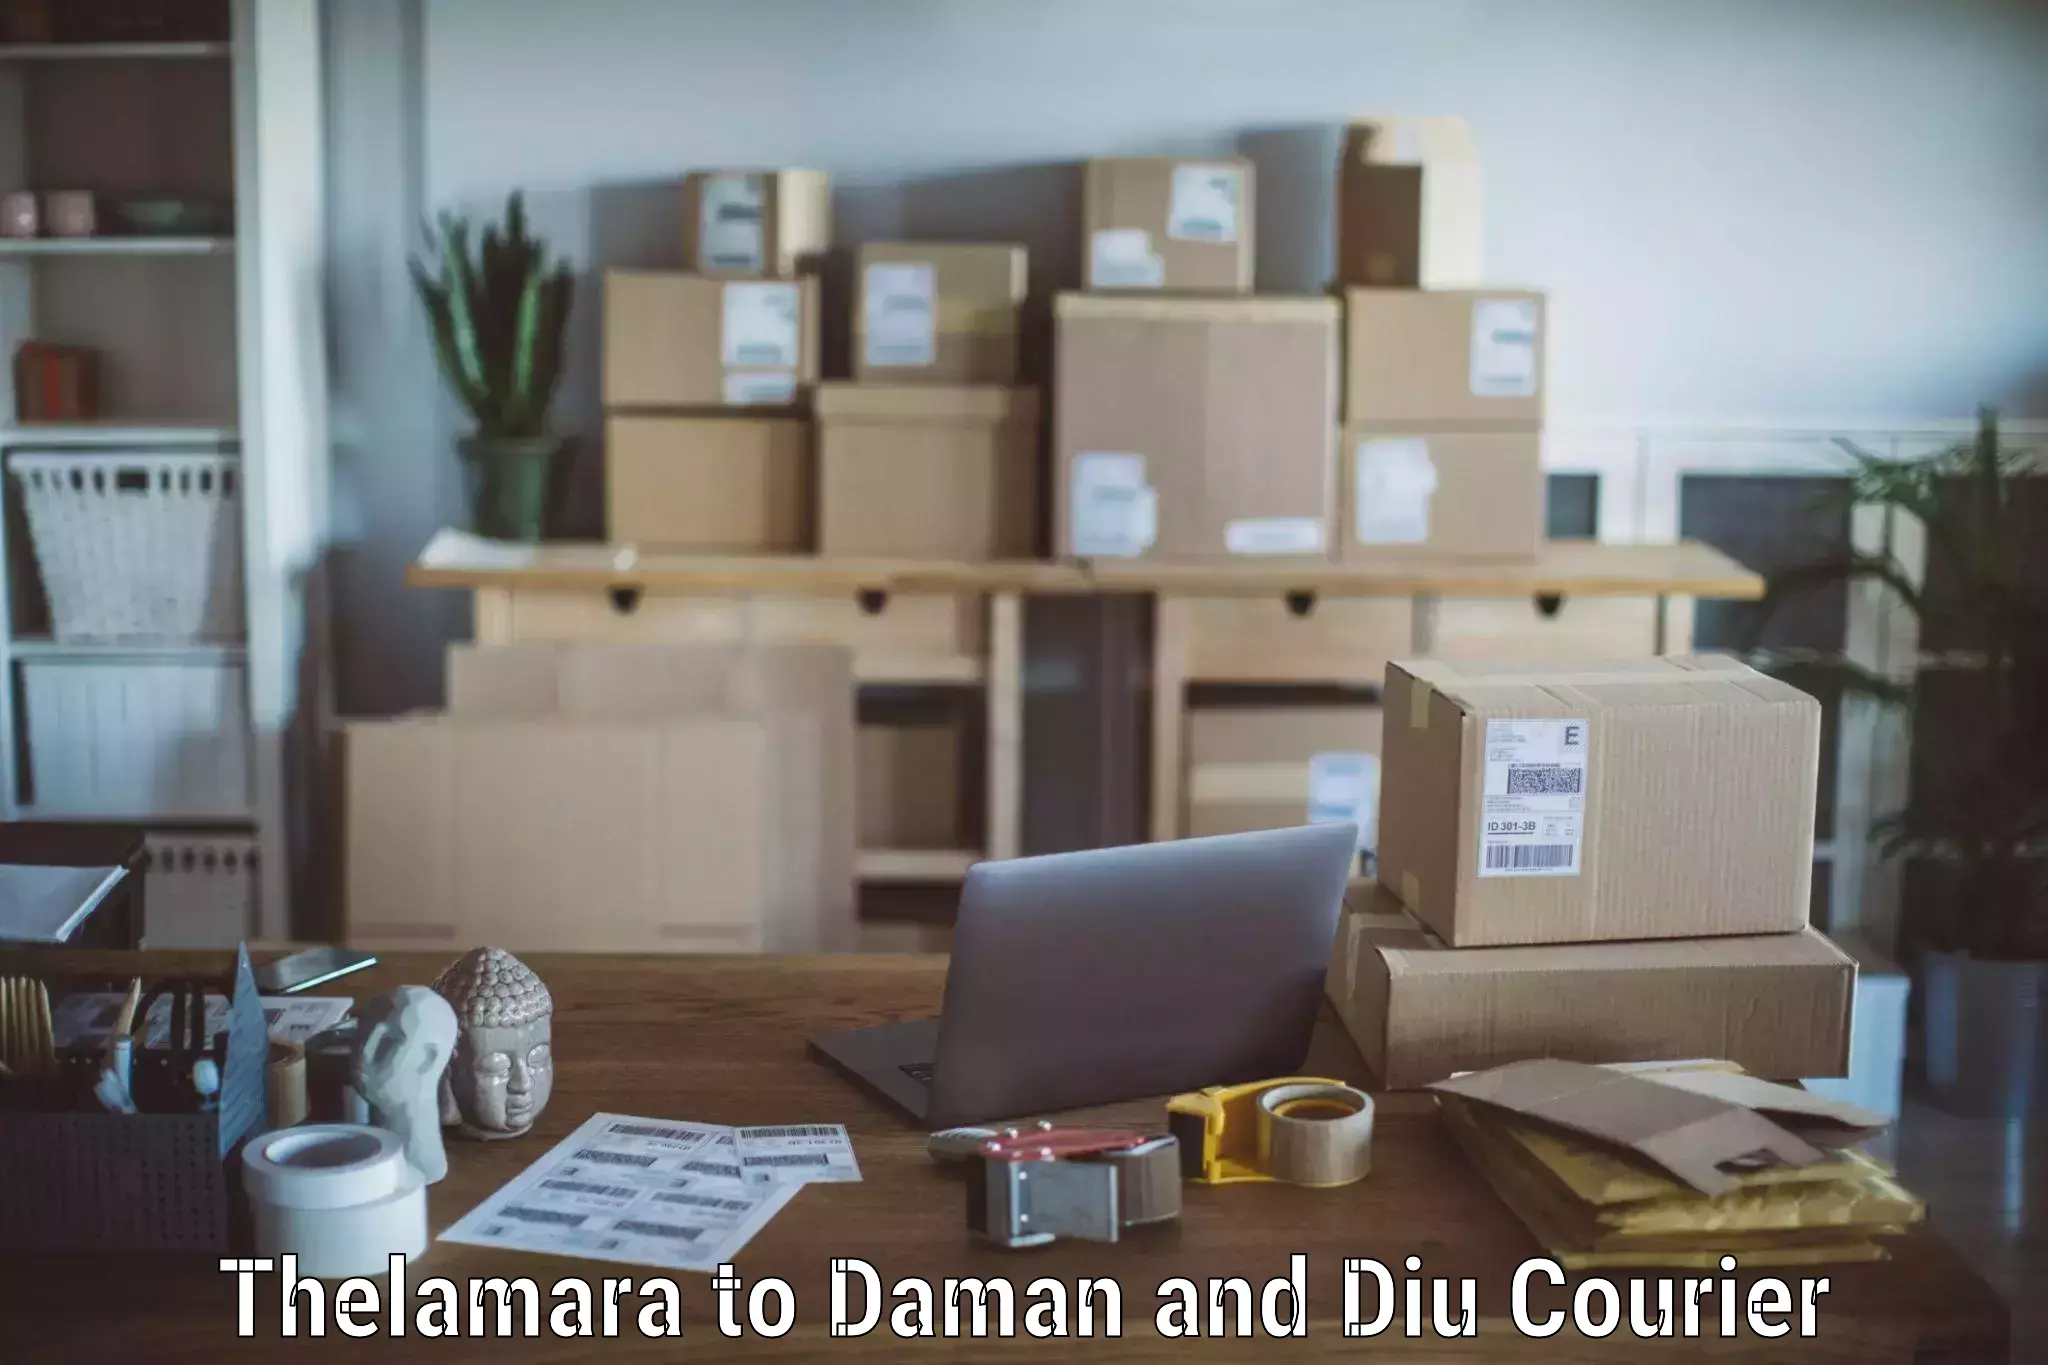 Professional packing services Thelamara to Diu